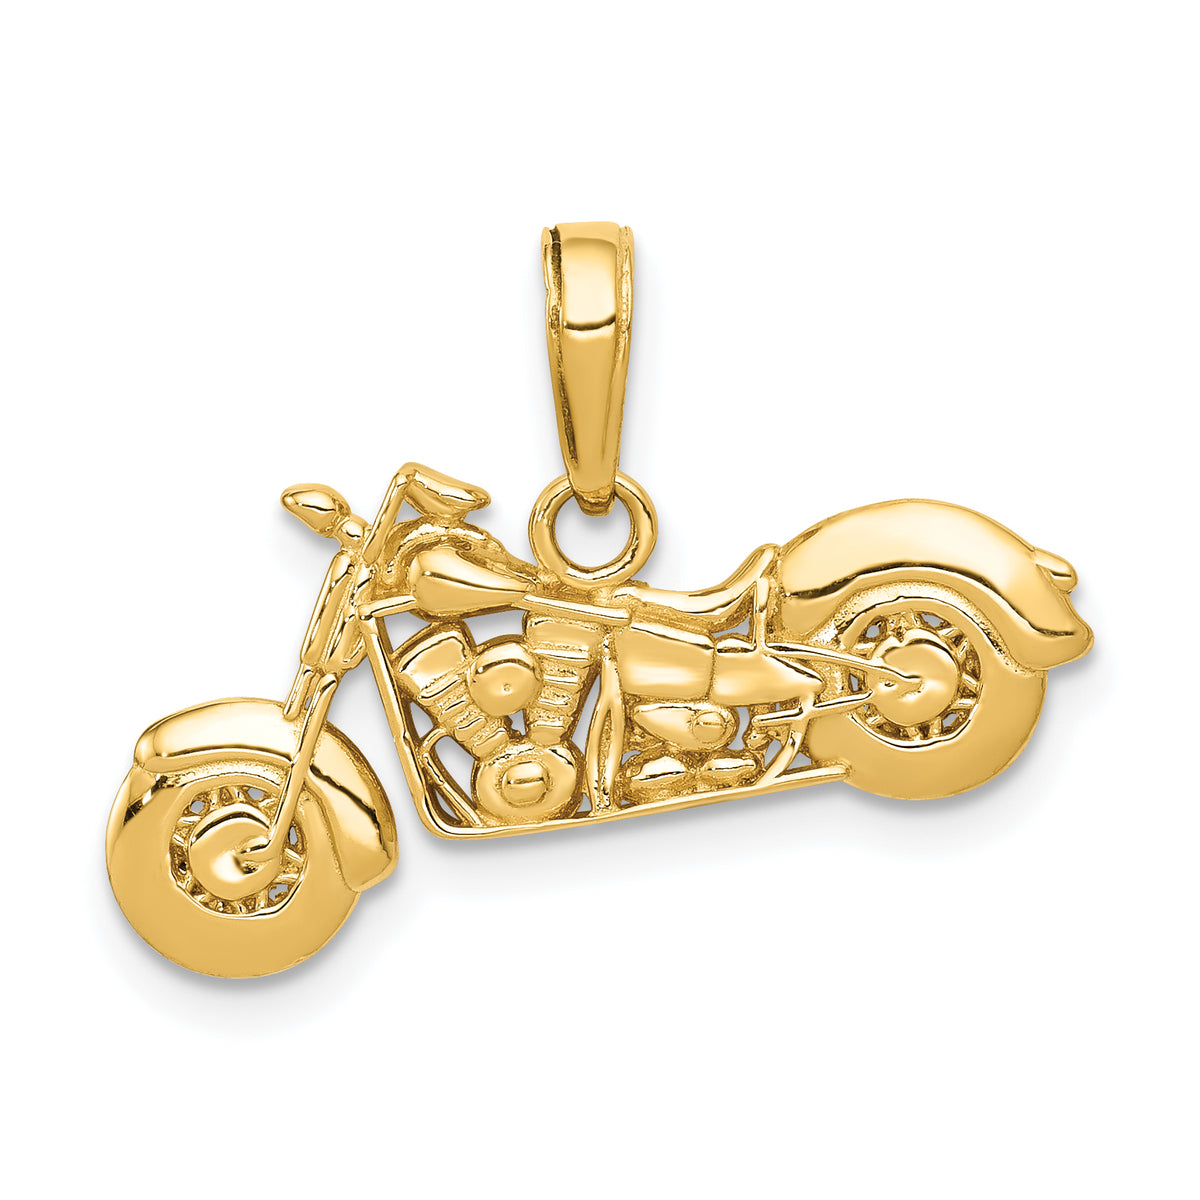 14K Gold Polished / Textured 3-D Motorcycle Pendant